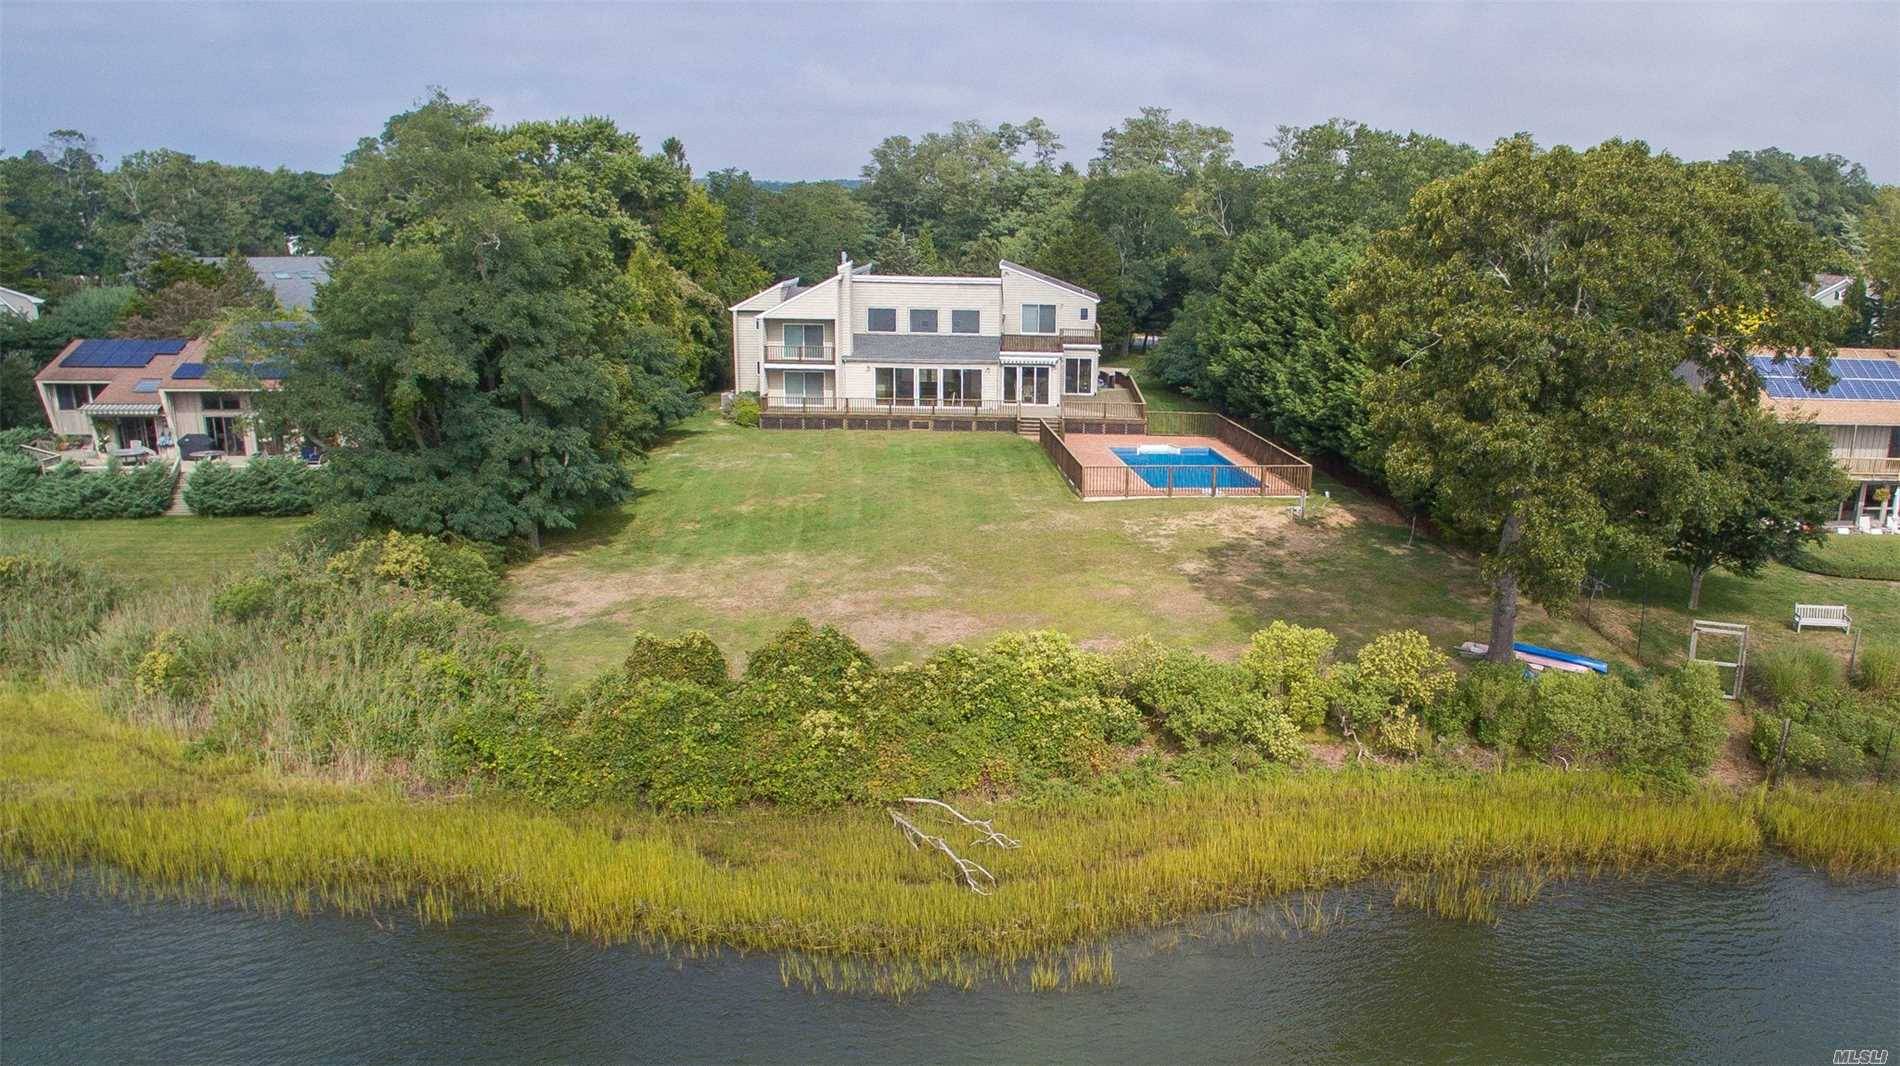 Dickerson Creek Waterfront Home Boasts An Open Unobstructed Vista Of Wades Beach, North Haven And Beyond.